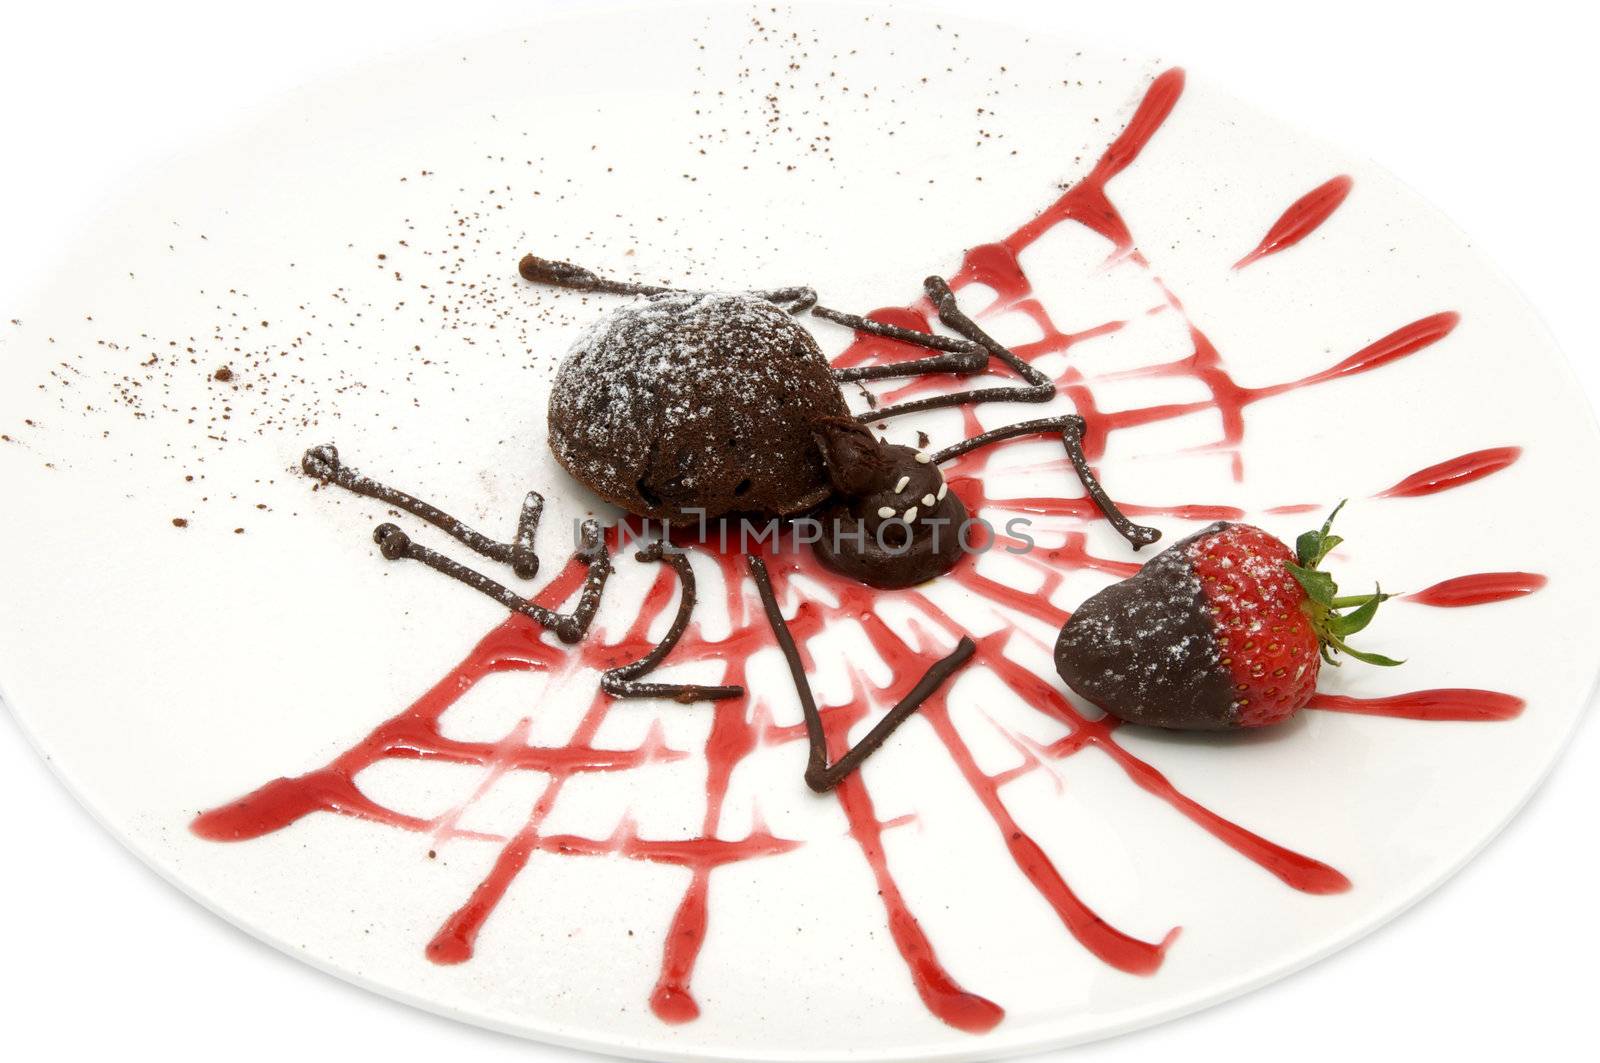 Chocolate and strawberry dessert by Lester120